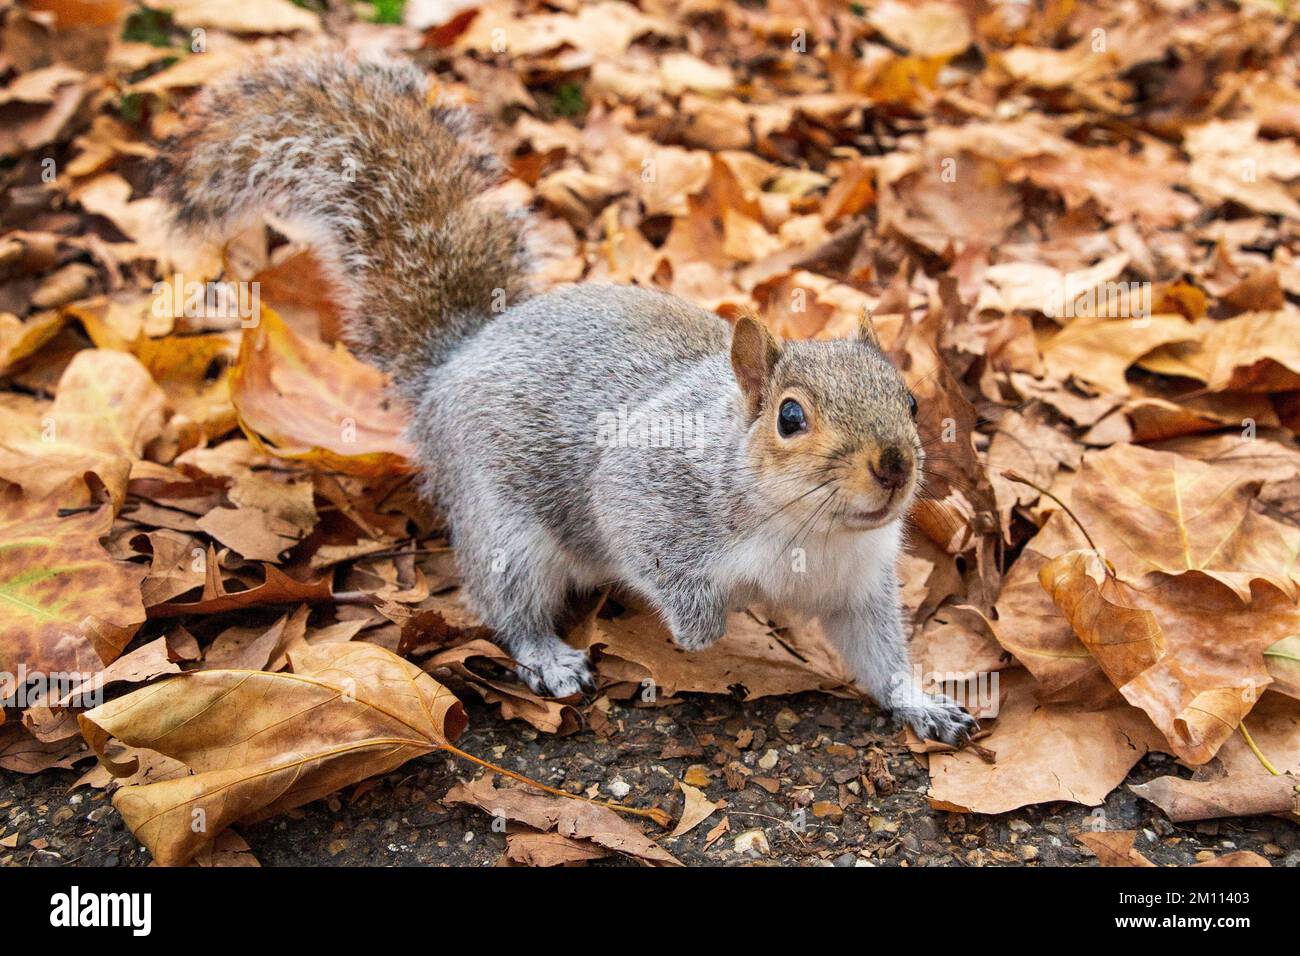 The Internet Is Going Nuts Over This Badass Squirrel | HuffPost  Entertainment